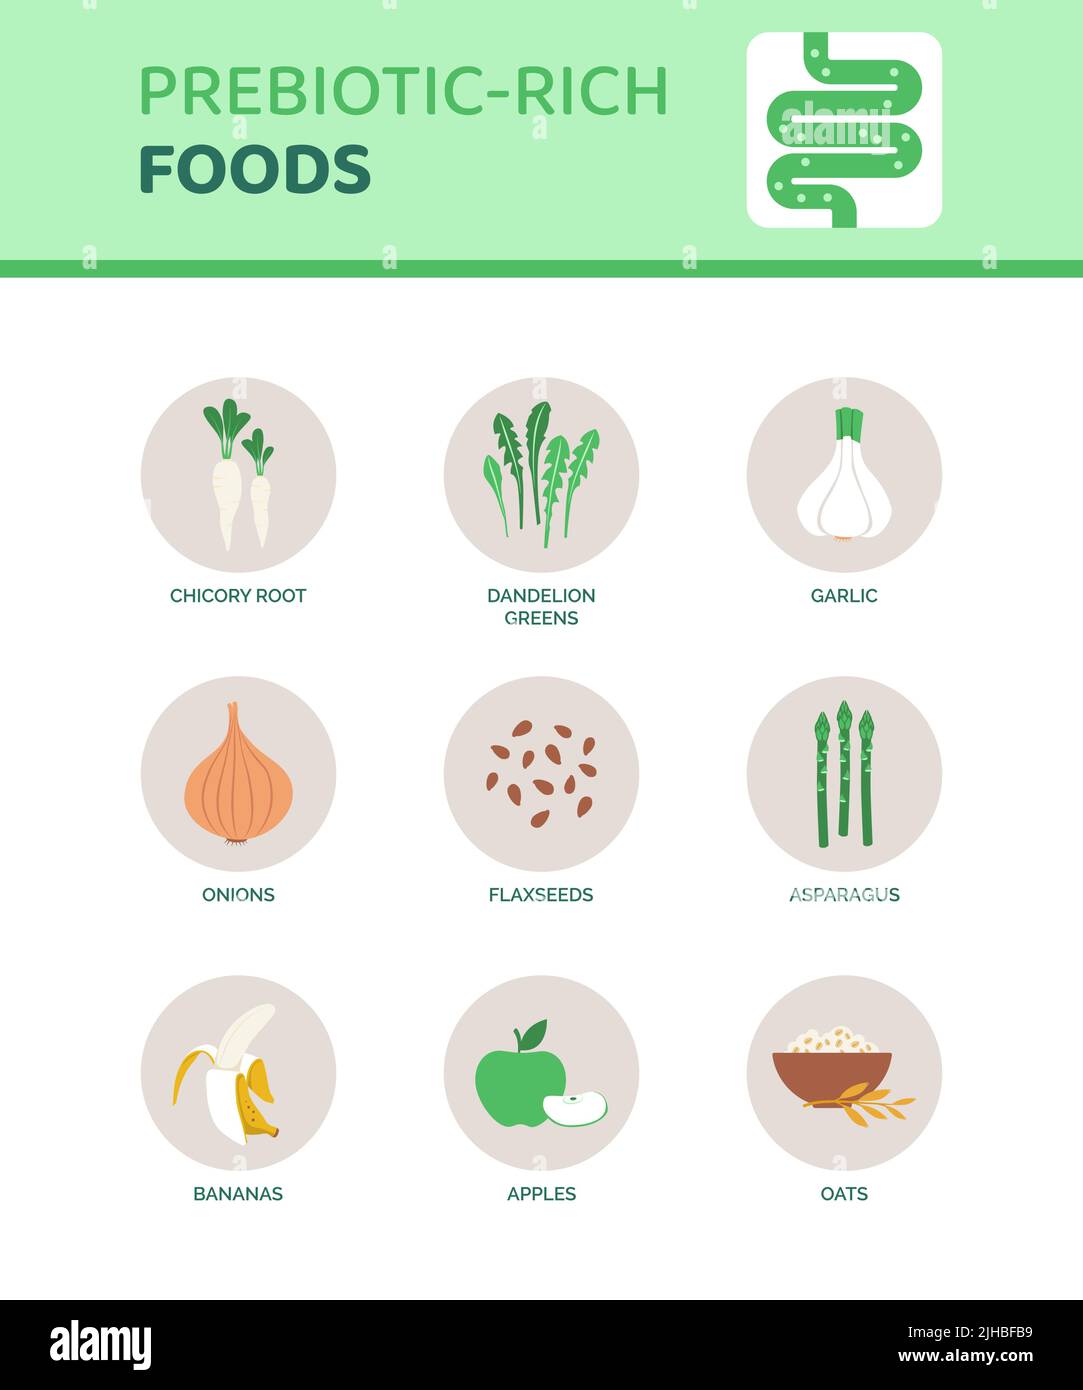 Prebiotic-rich foods that help digestion, infographic with icons Stock Vector